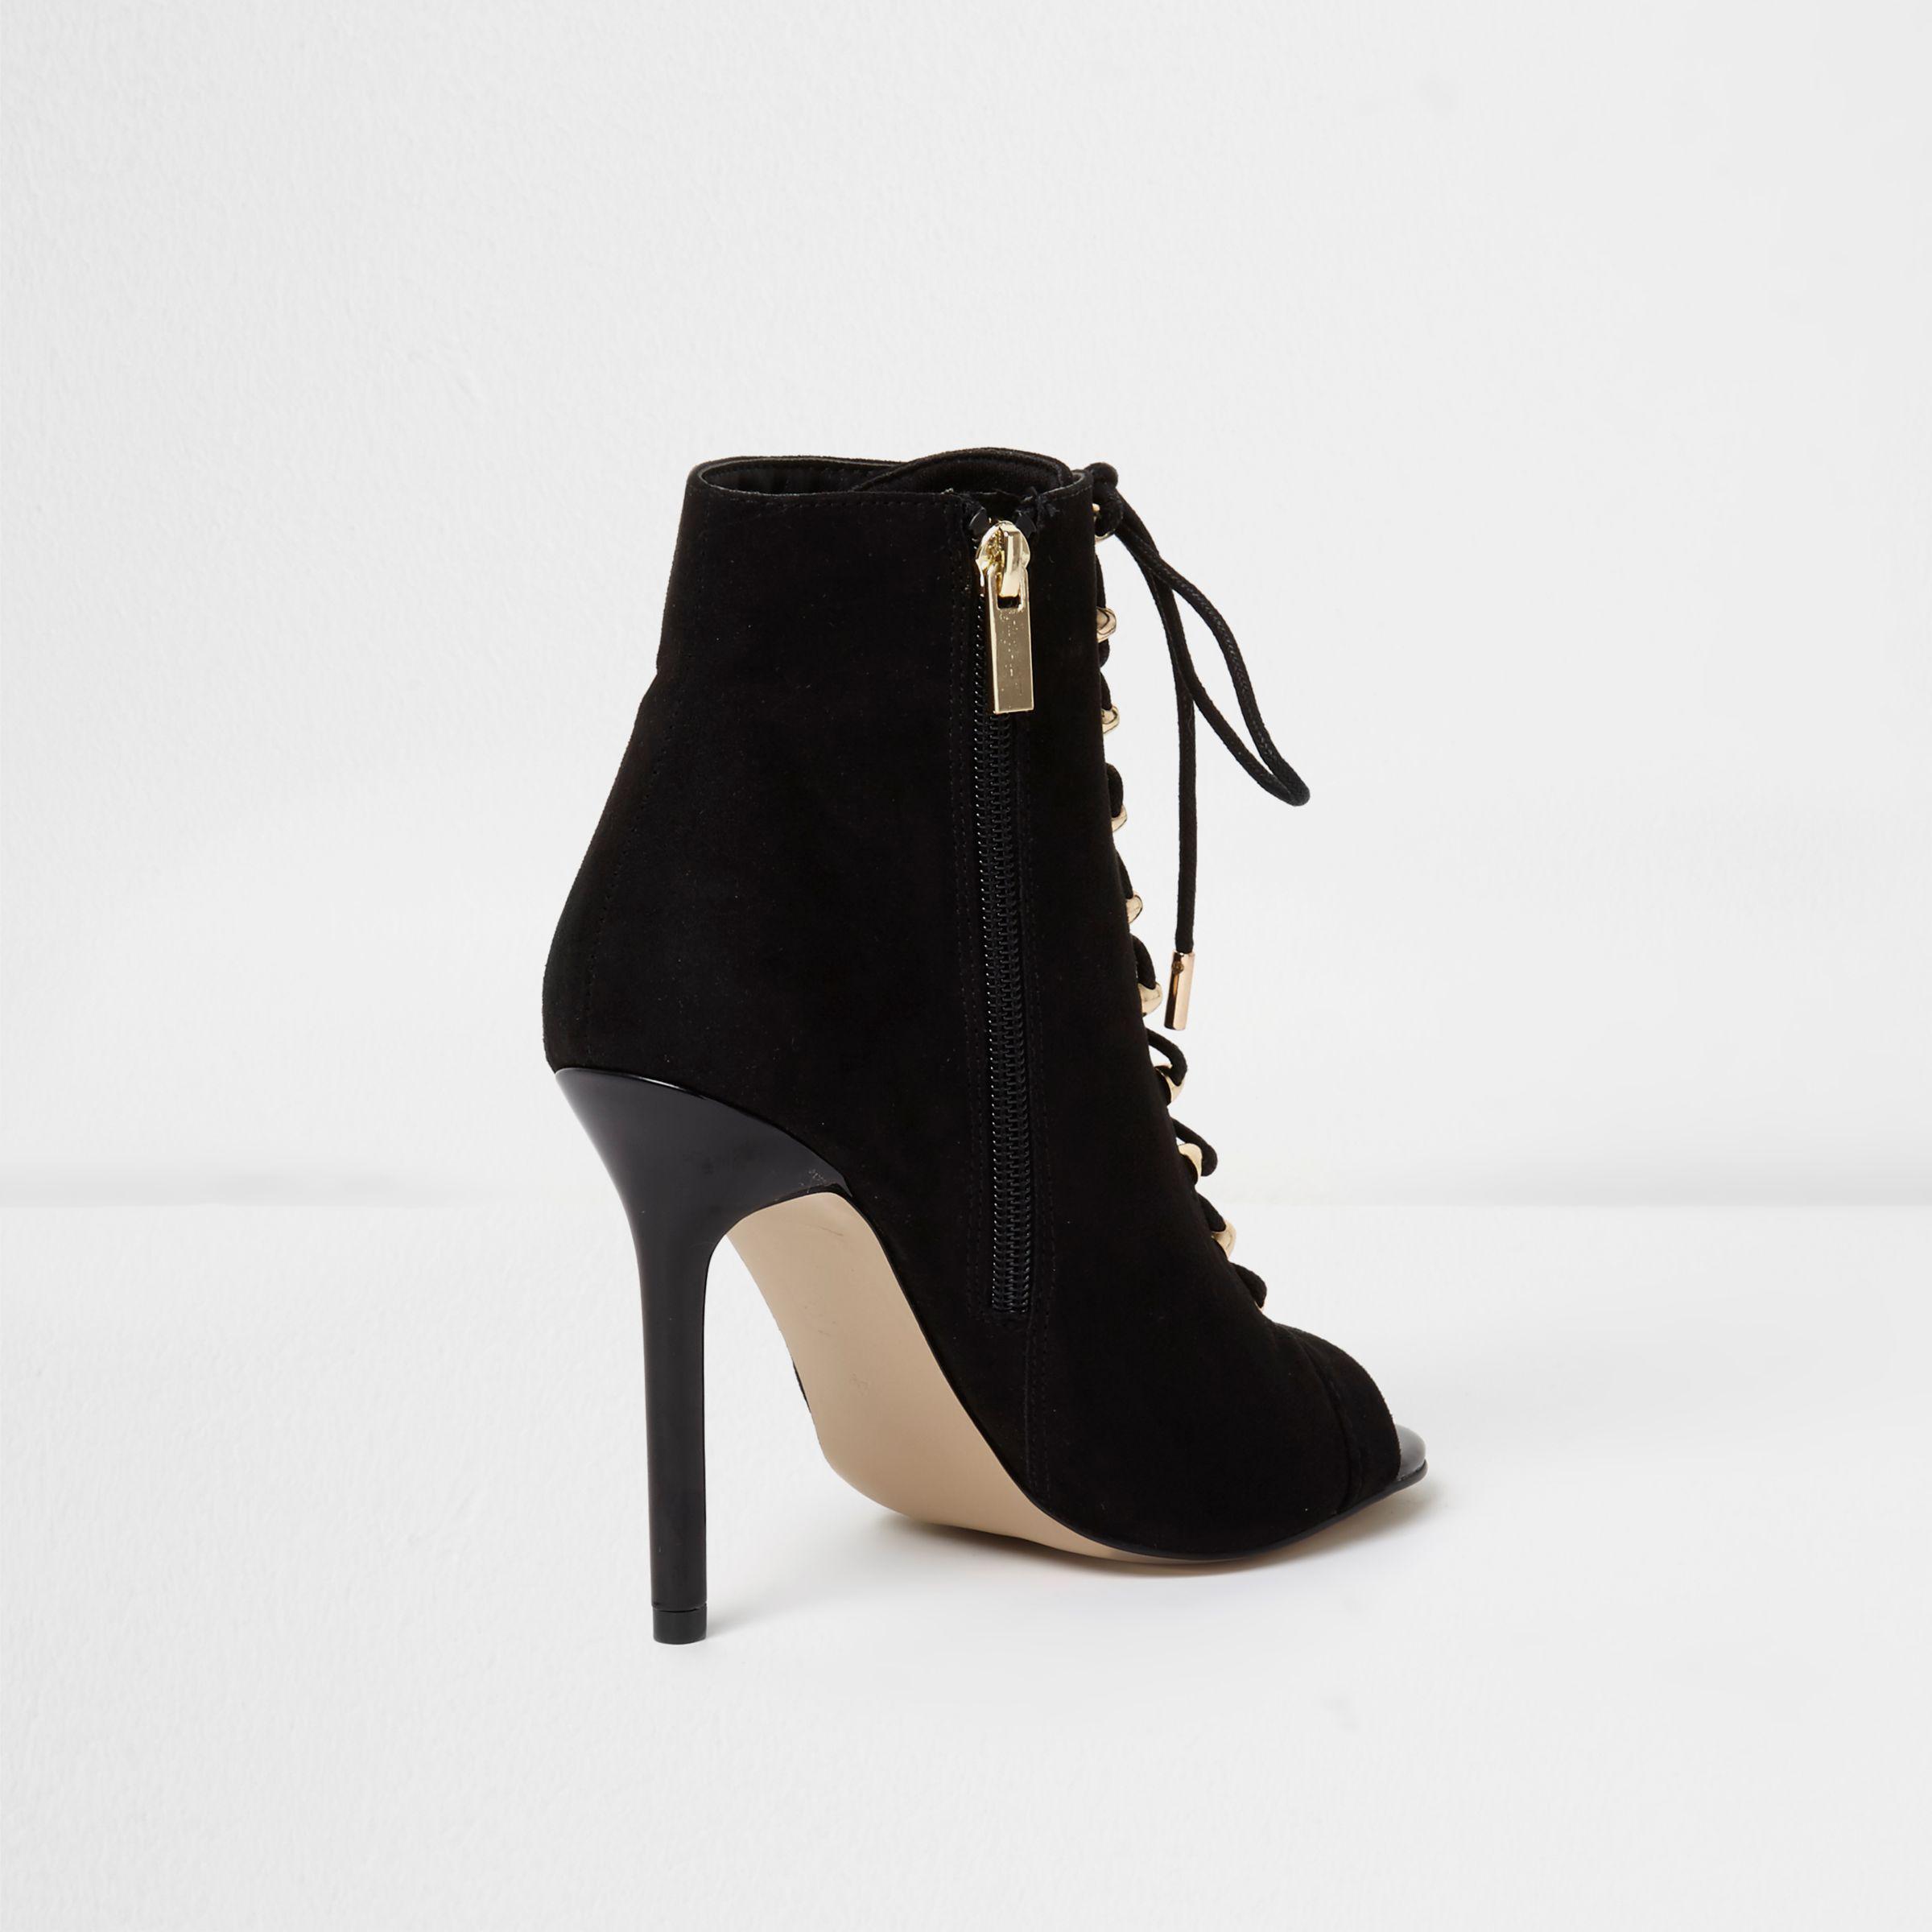 River Island Black Open Toe Lace-up Heeled Boots | Lyst